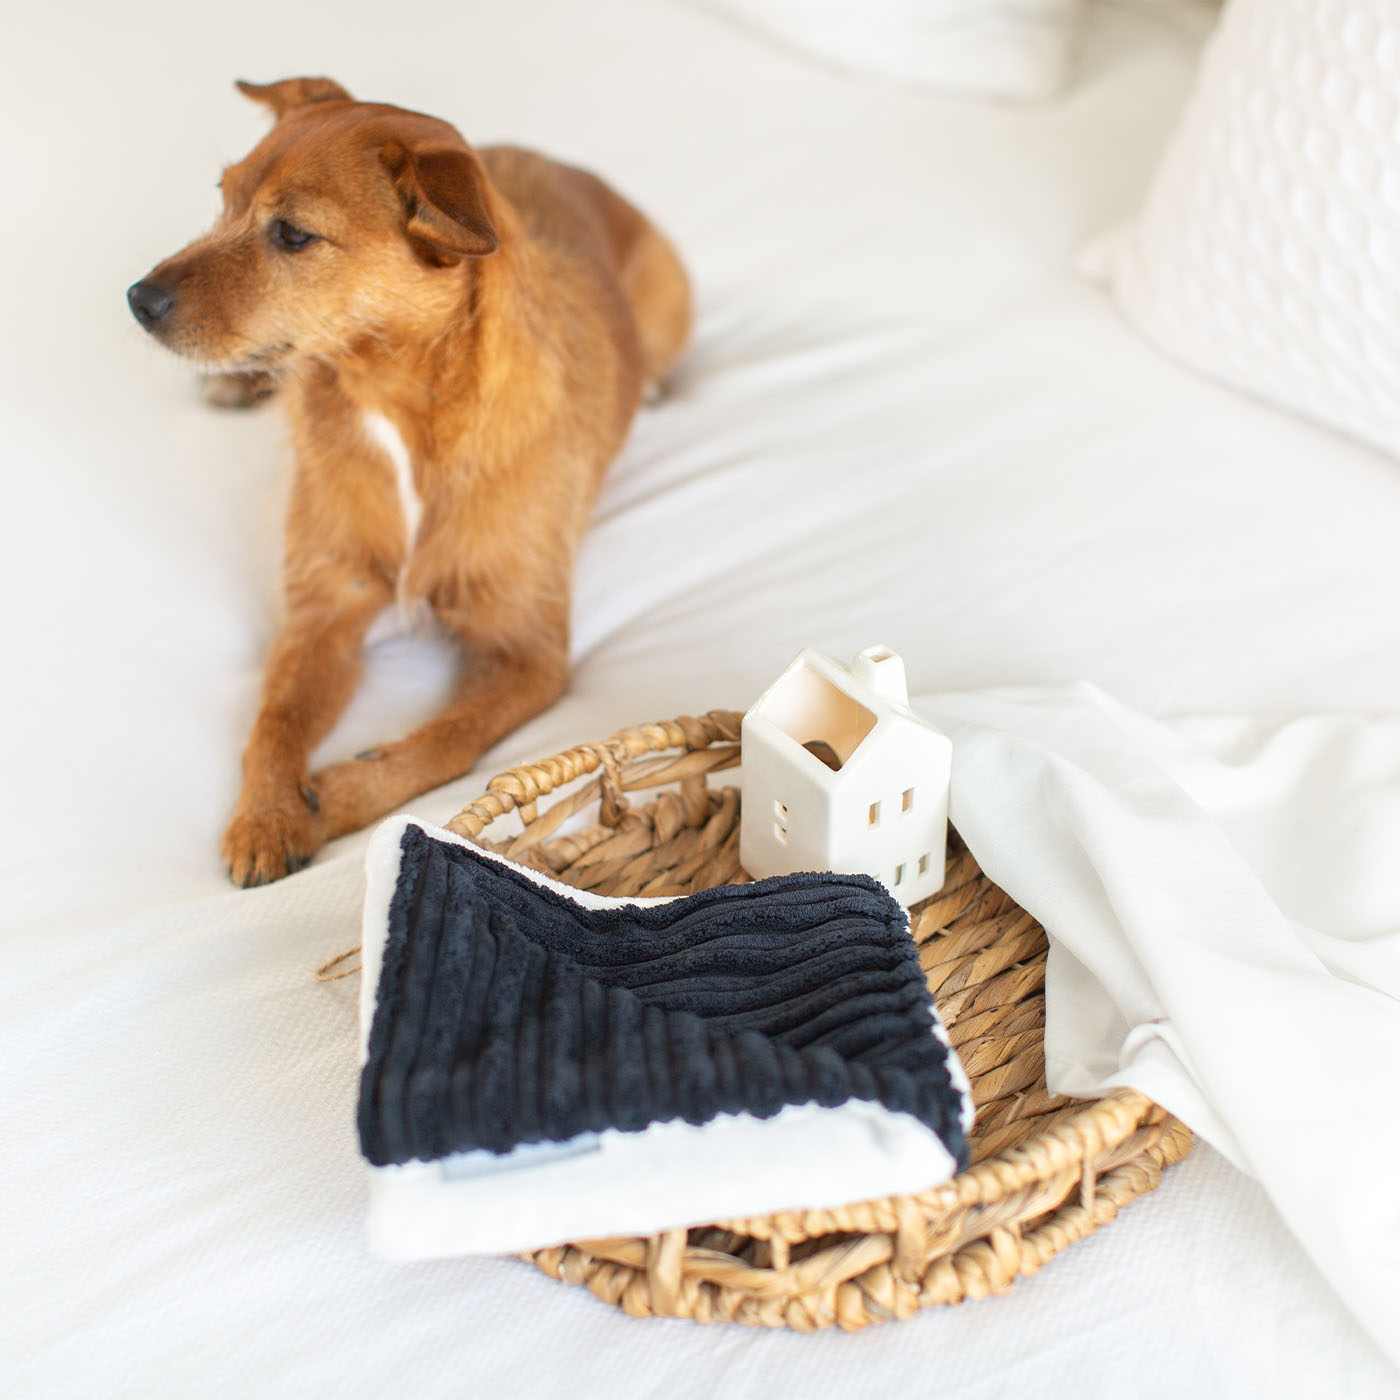 Discover our Puppy Scent Blanket in Navy Essentials Plush. Perfect to help settle in a new puppy. Give to puppy whilst they are with mum to bring the scent of mum with them, this is great to help relax your puppy Smooths the ‘moving home’ process. Made from plush ribbed fabric and super soft sherpa/faux fur. now available at Lords and Labradors